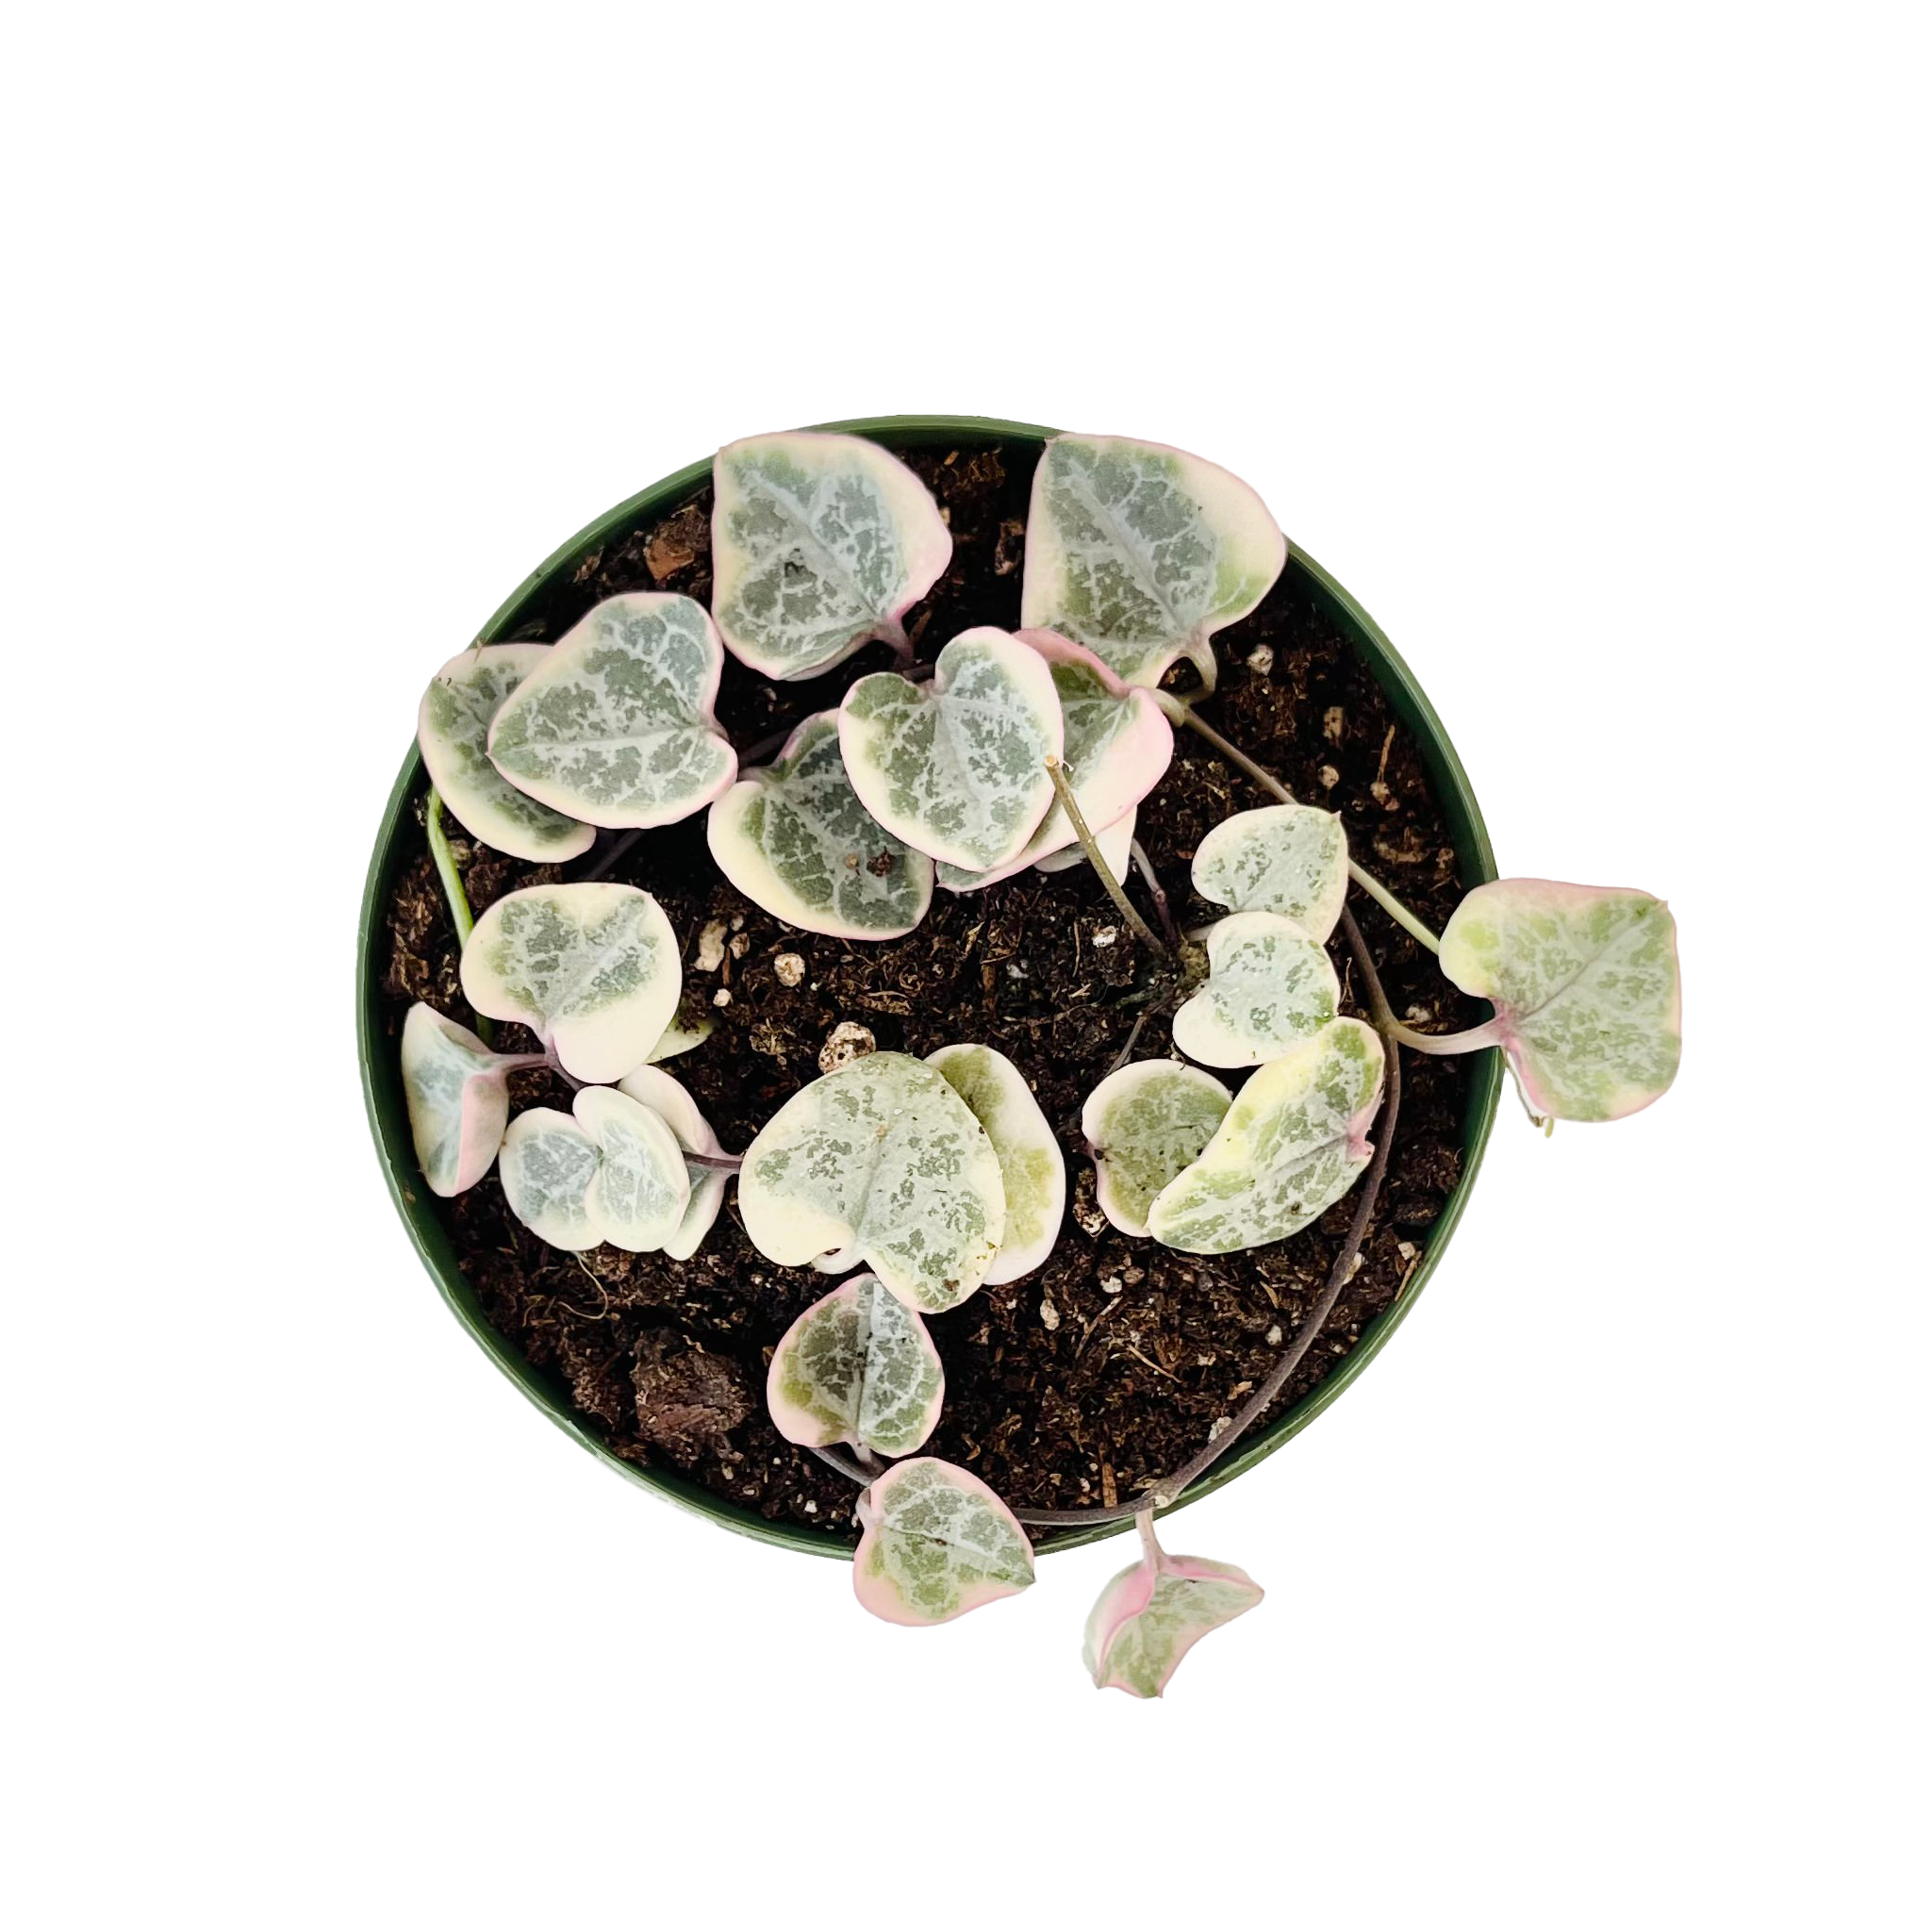 Ceropegia Woodii Variegated String of Hearts